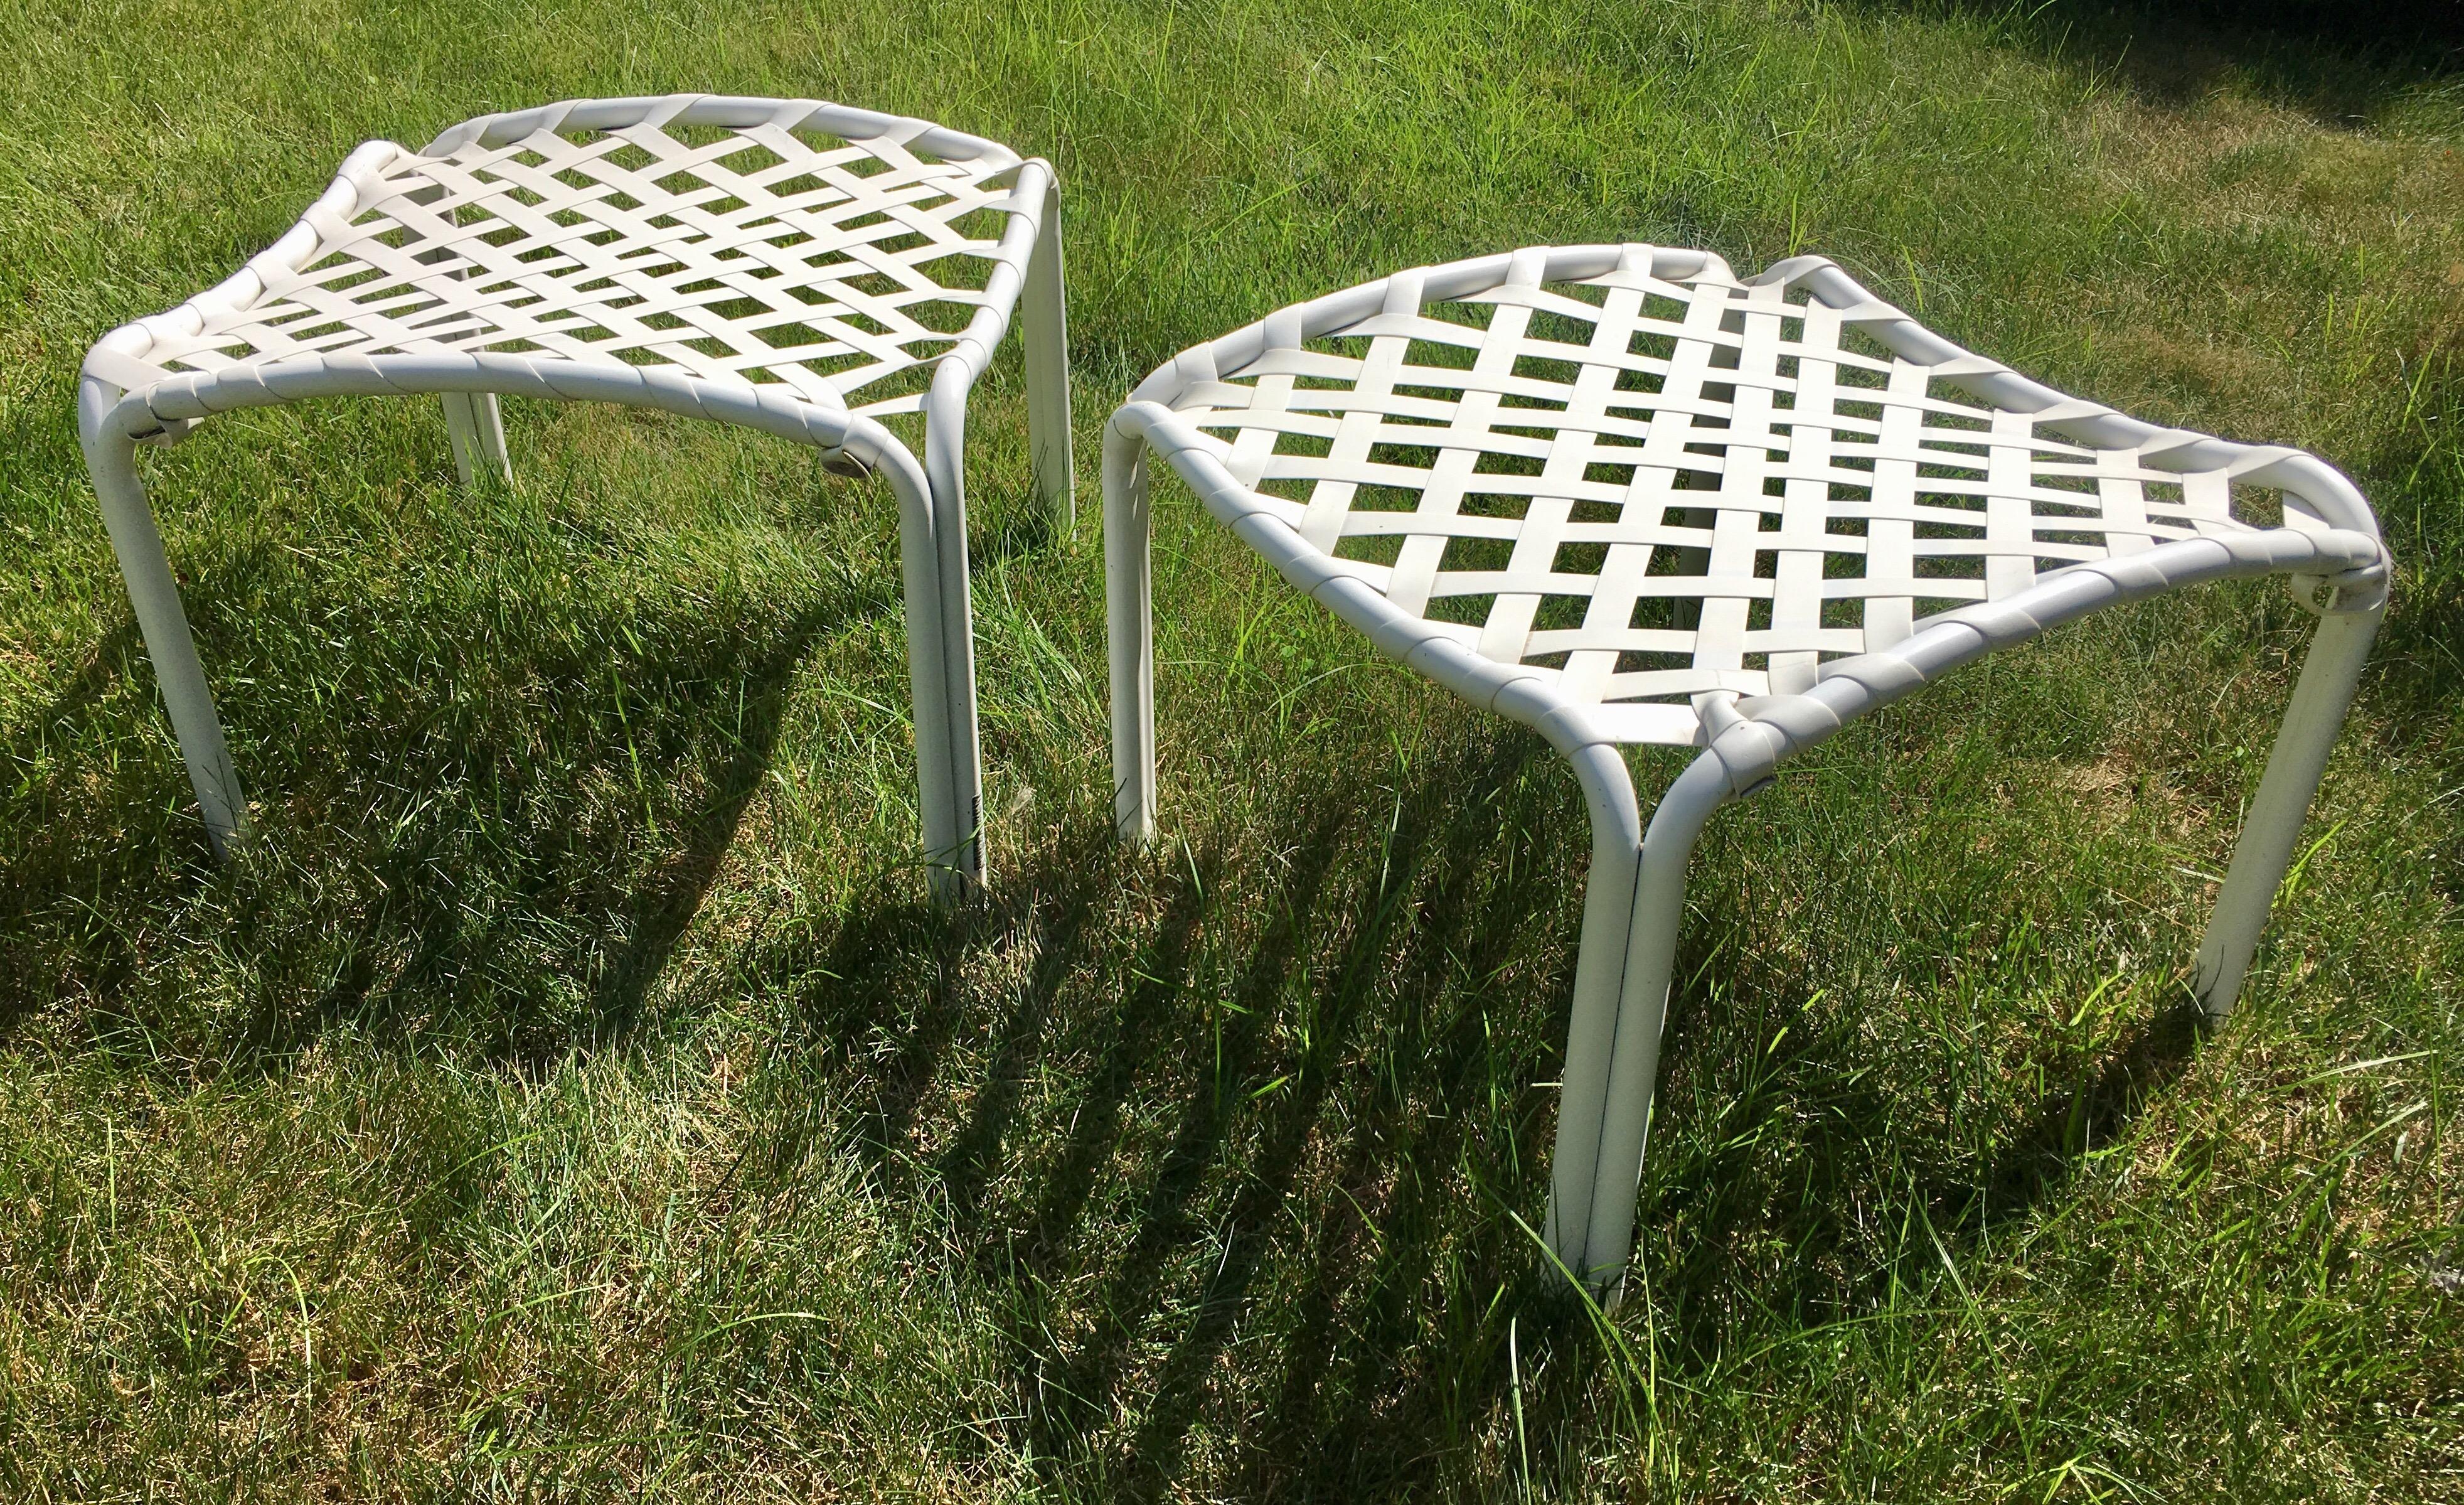 Pair of Mid-Century Modern outdoor patio or deck ottoman stools by Brown Jordan. White tubular curved aluminum frames feature original white vinyl strapping in a cross-lace pattern. Original Brown Jordan labels and item numbers on frames. Perfect